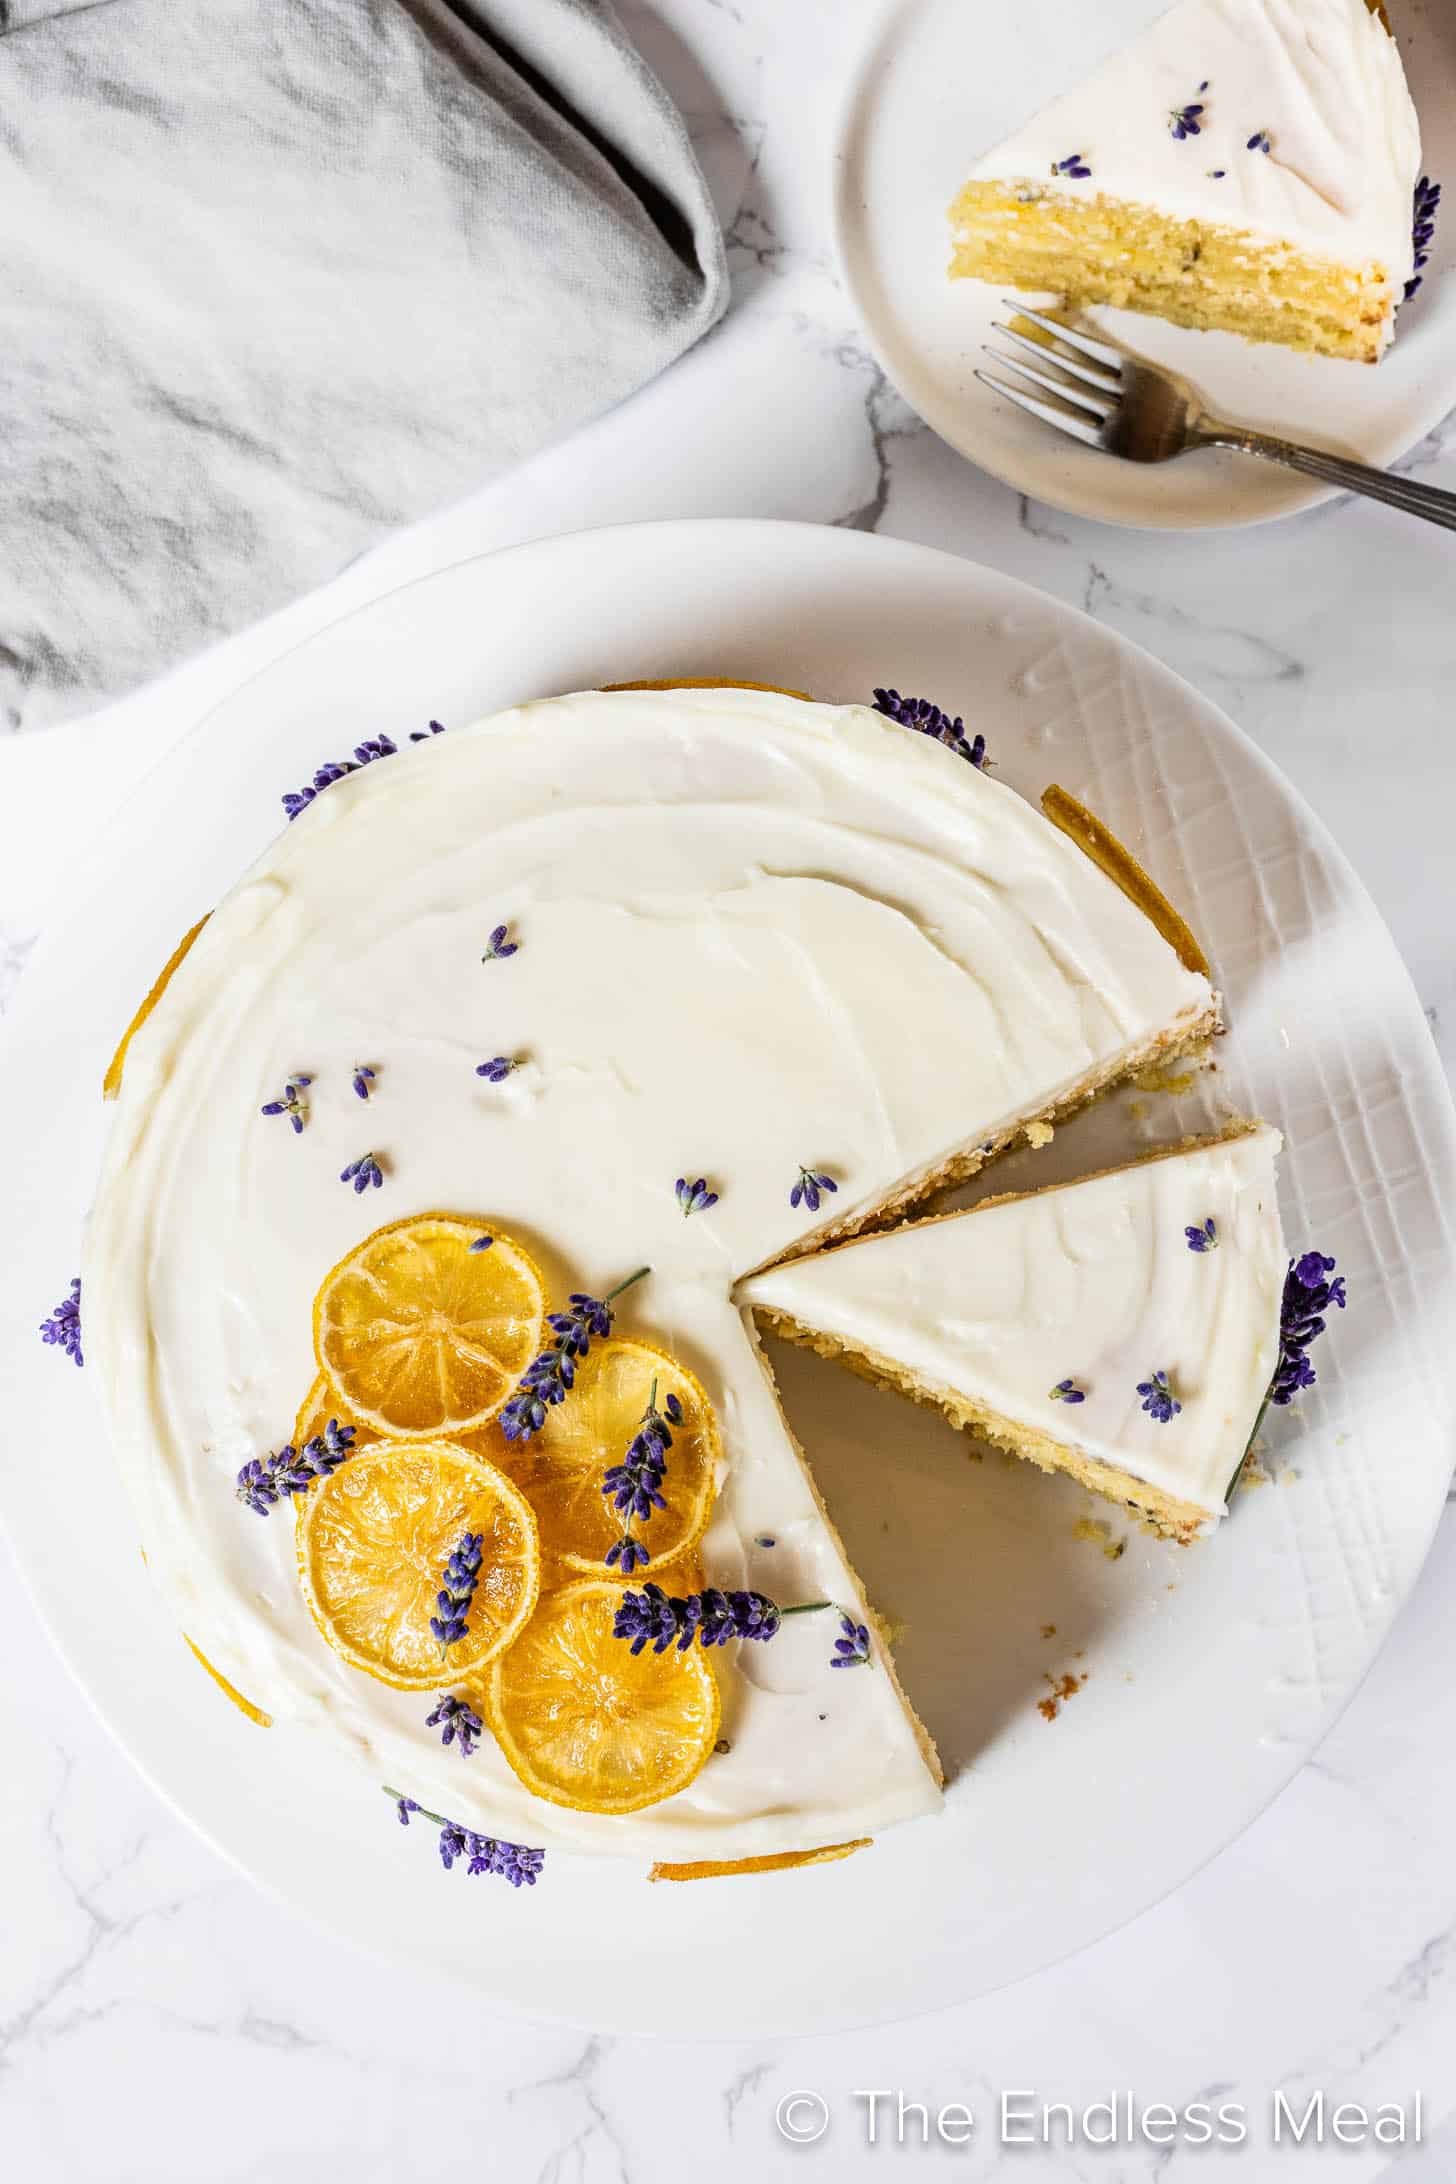 Looking down on a Lemon Lavender Cake on a cake stand